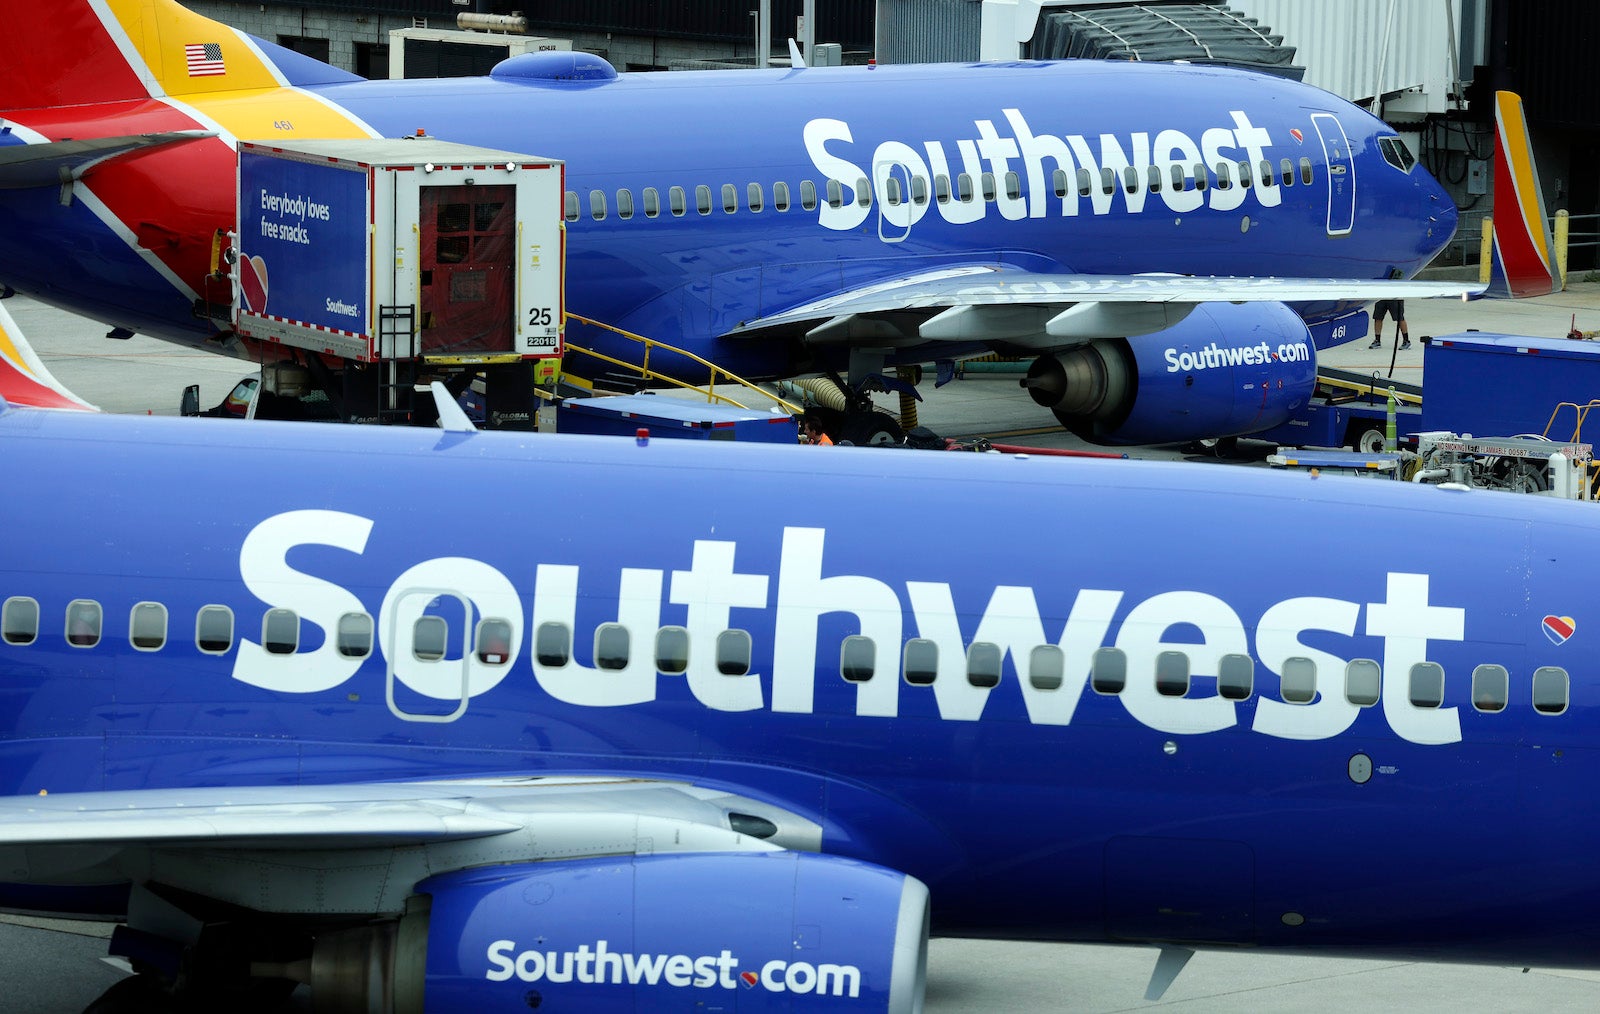 Two Southwest Boeing 737 aircraft at Baltimore Airport